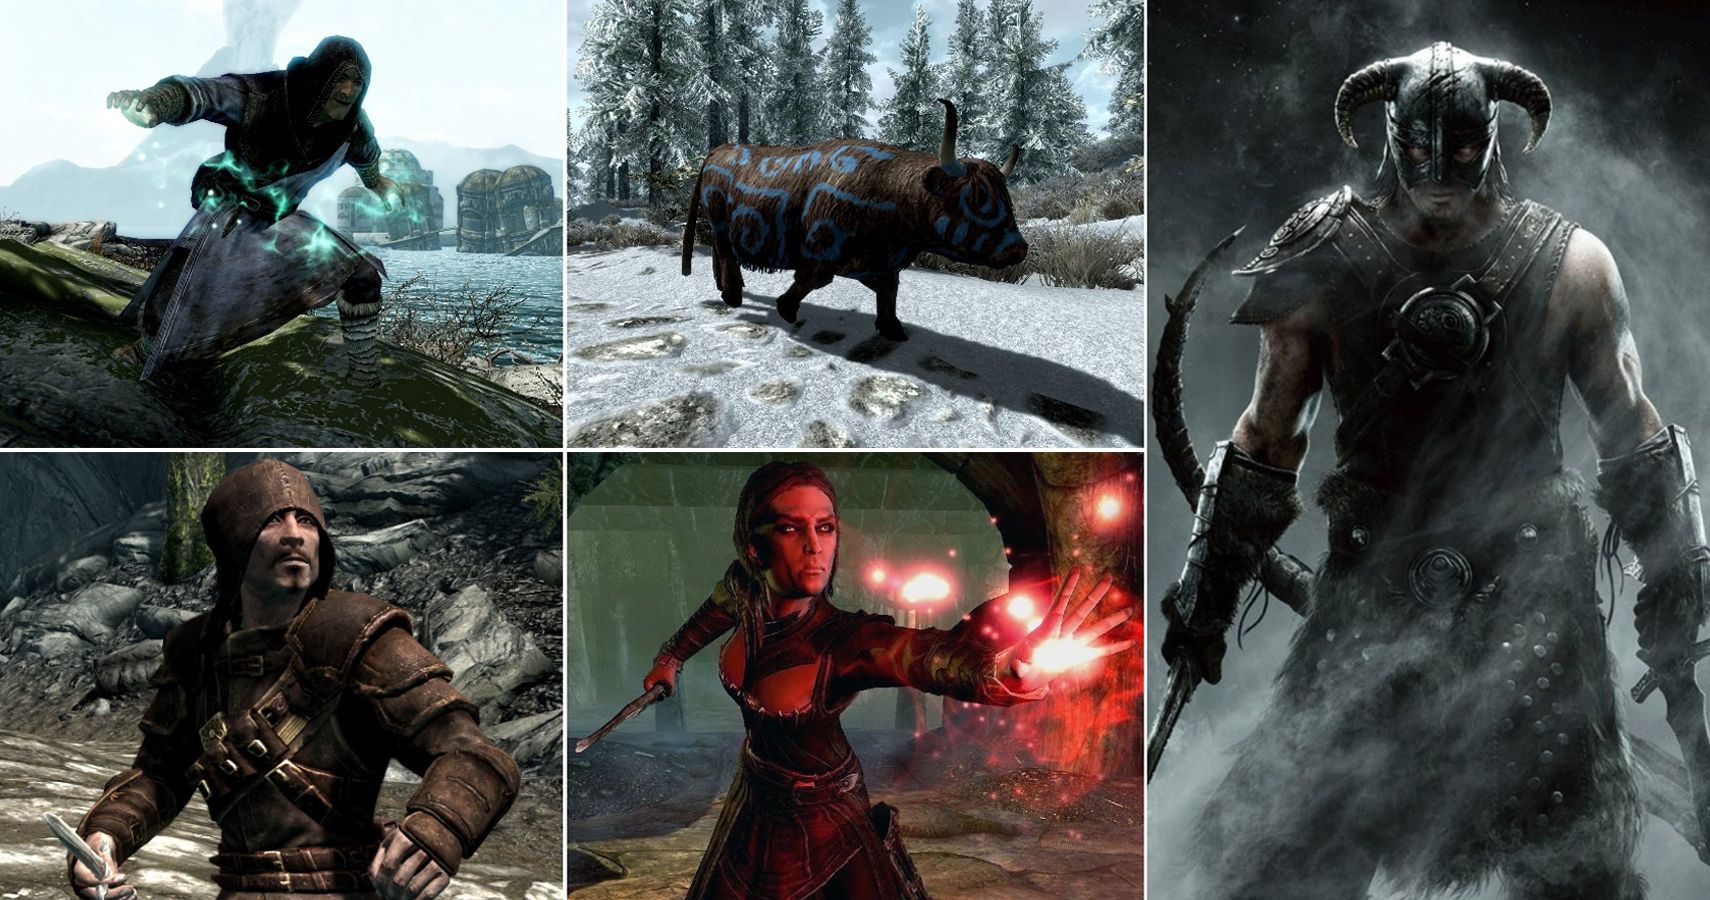 Skyrim: The 10 Craziest Random Encounters You Probably Missed